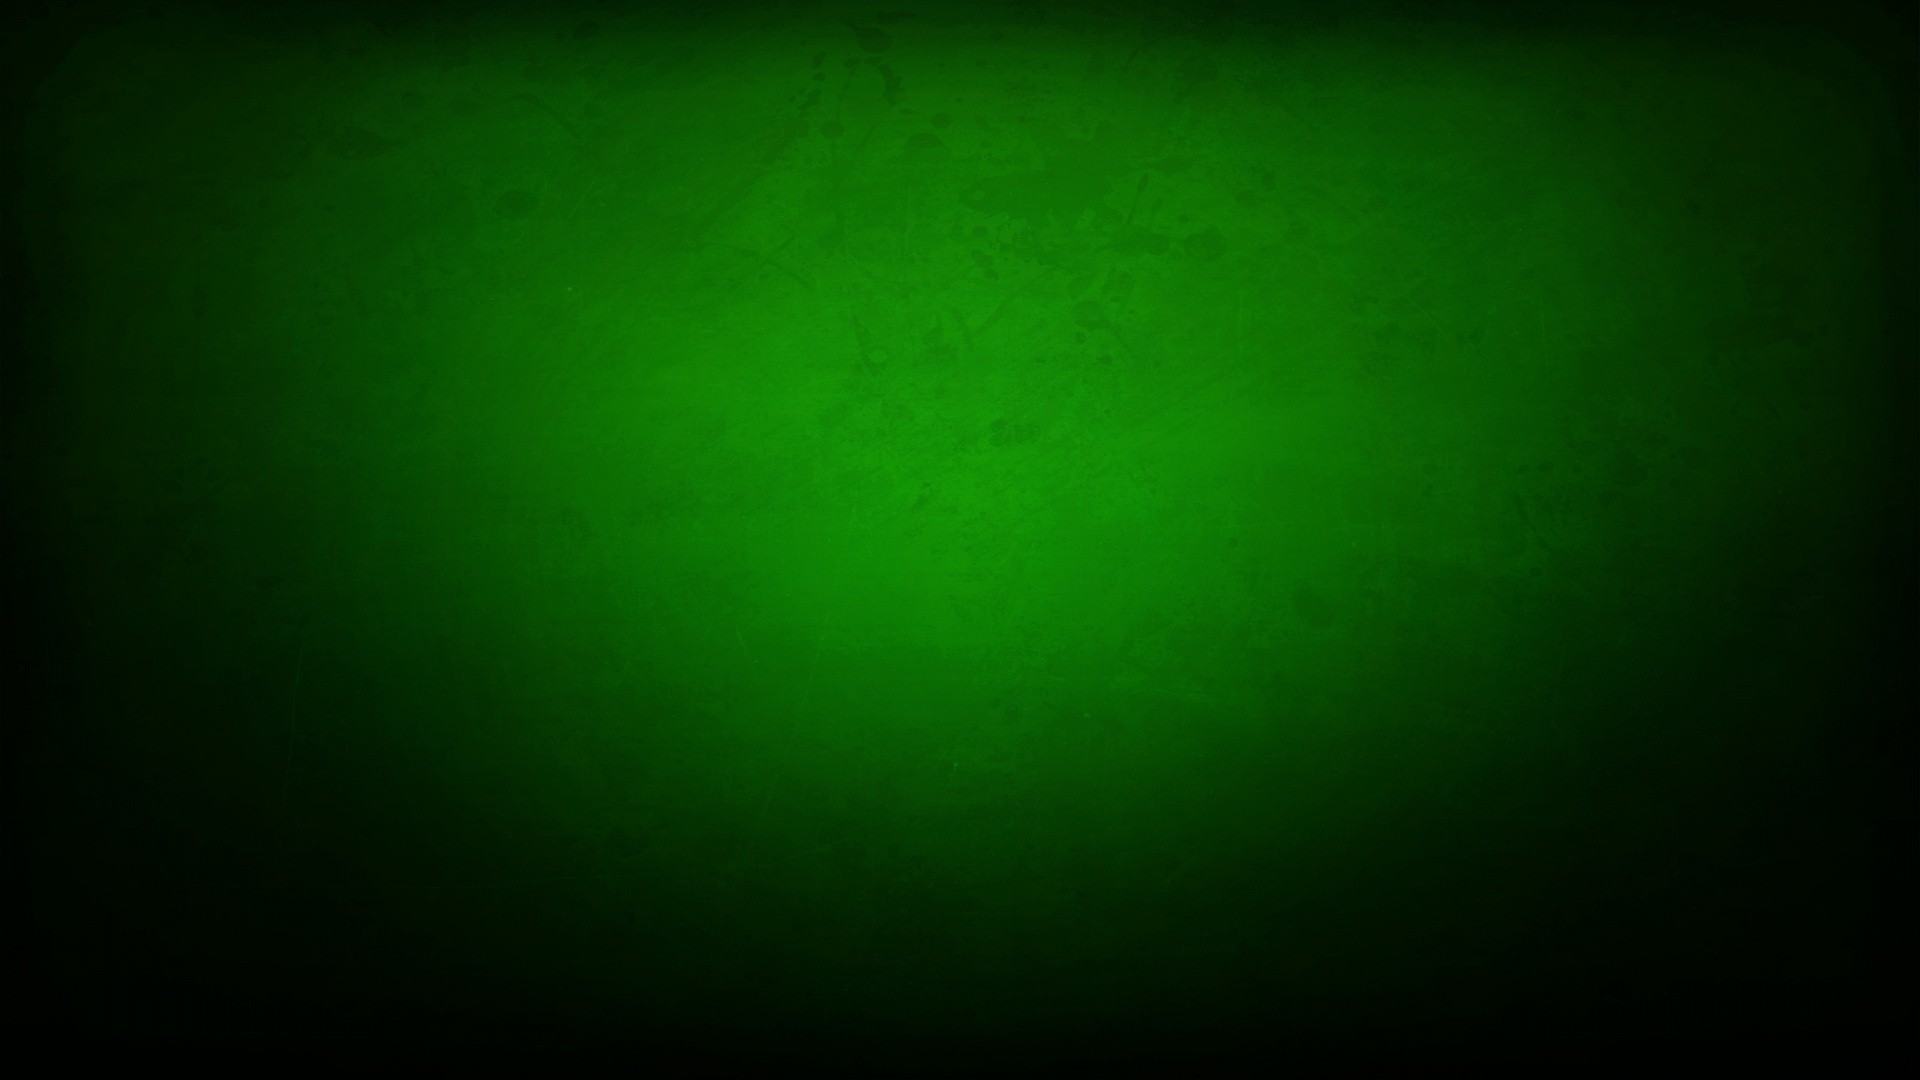 Wallpapers Computer Dark Green with image resolution 1920x1080 pixel. You can make this wallpaper for your Desktop Computer Backgrounds, Mac Wallpapers, Android Lock screen or iPhone Screensavers